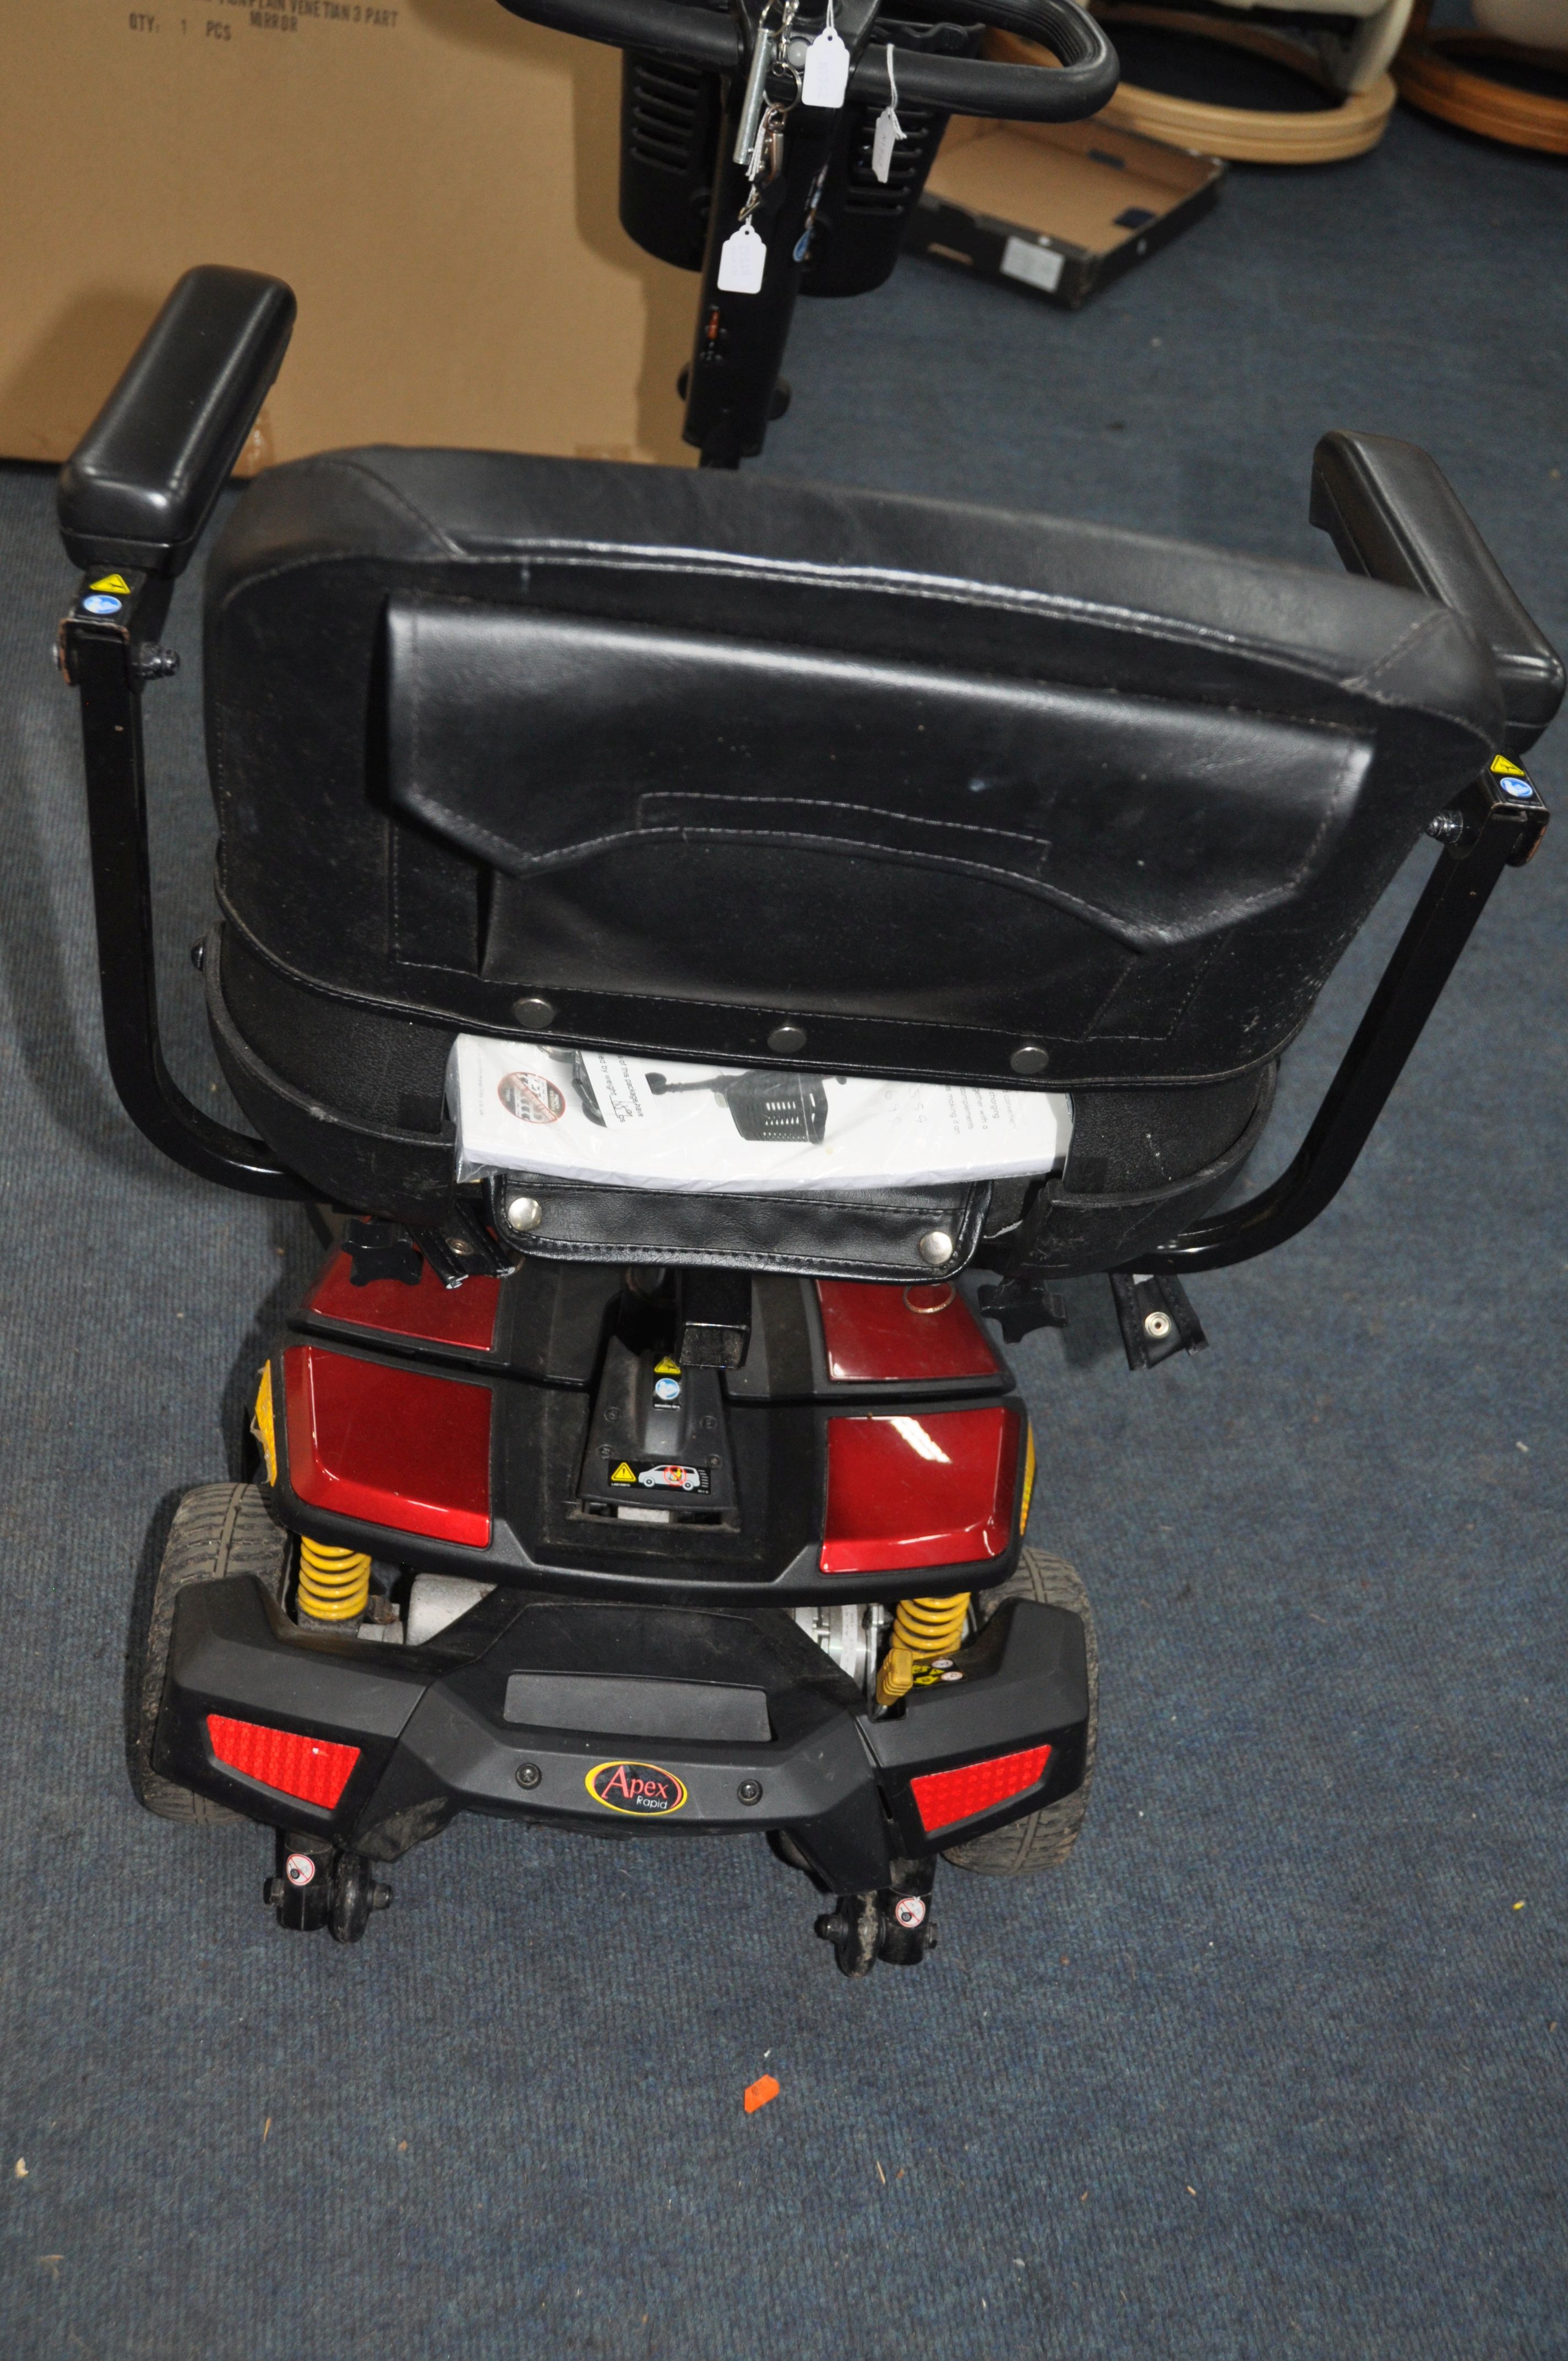 A GO GO ELITE TRAVELLER LX MOBILITY SCOOTER with charger front basket and spare colour change panels - Image 4 of 5